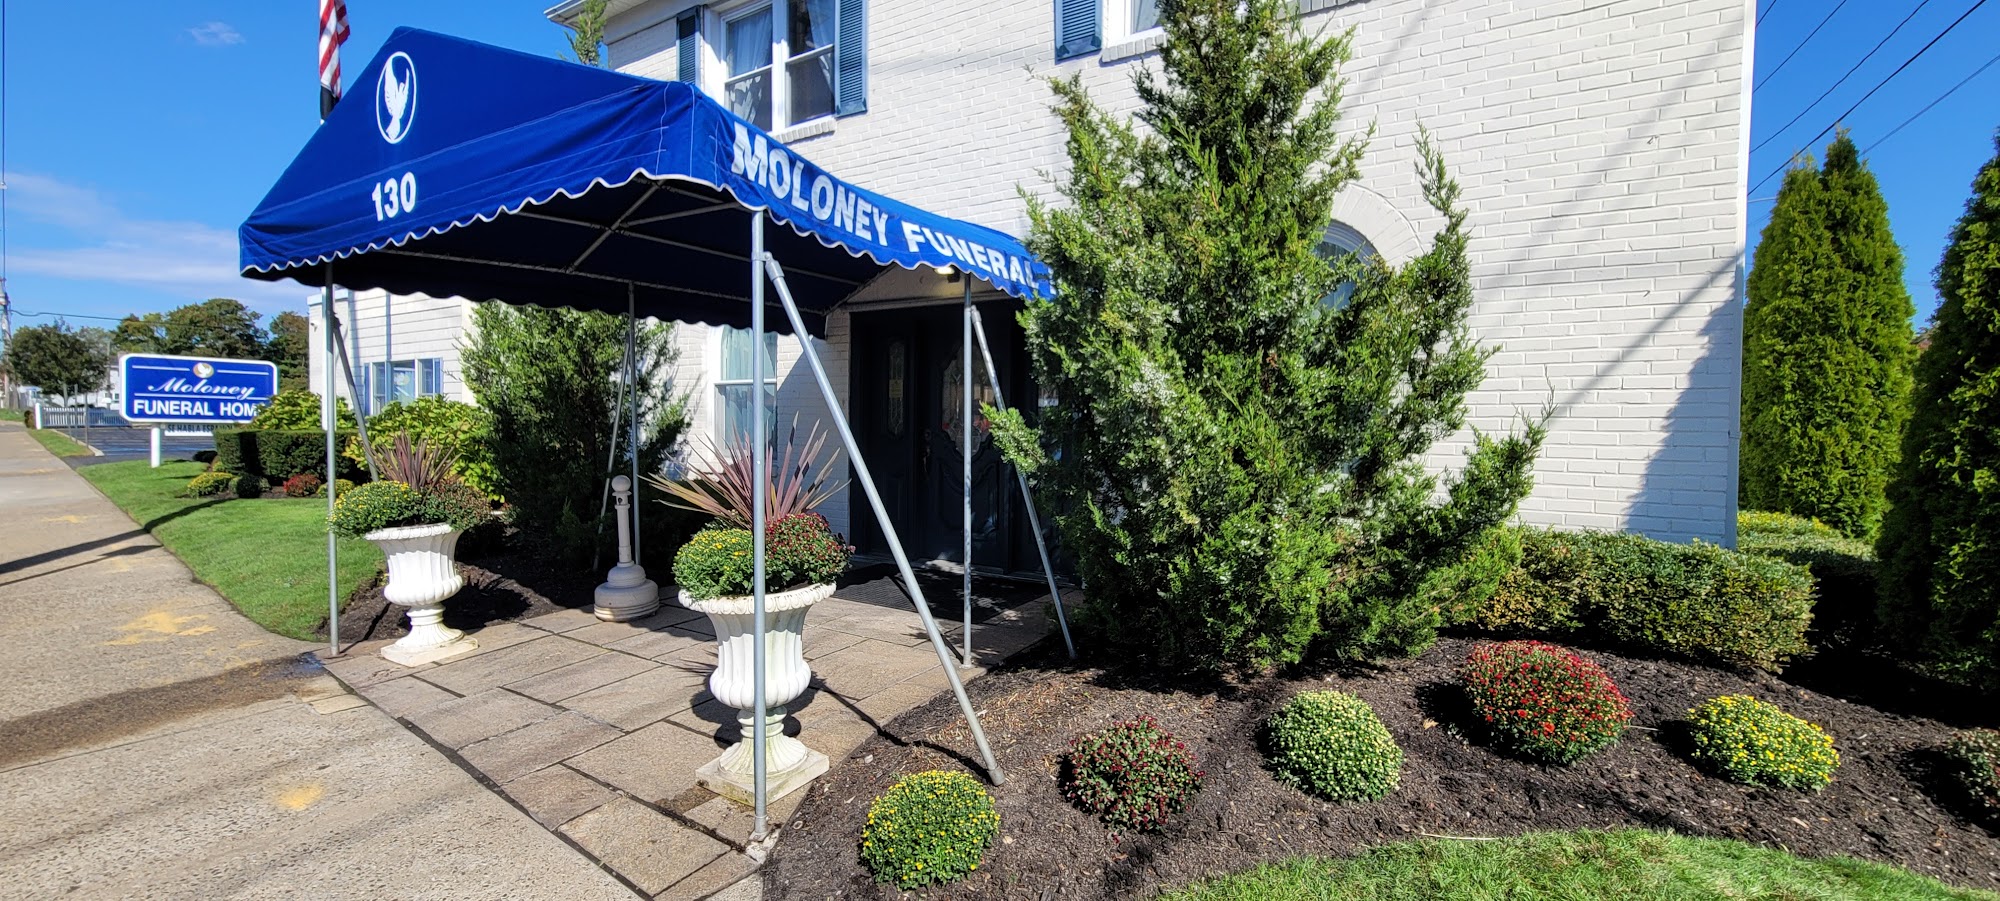 Moloney's Central Islip Funeral Home 130 Carleton Ave, Central Islip New York 11722